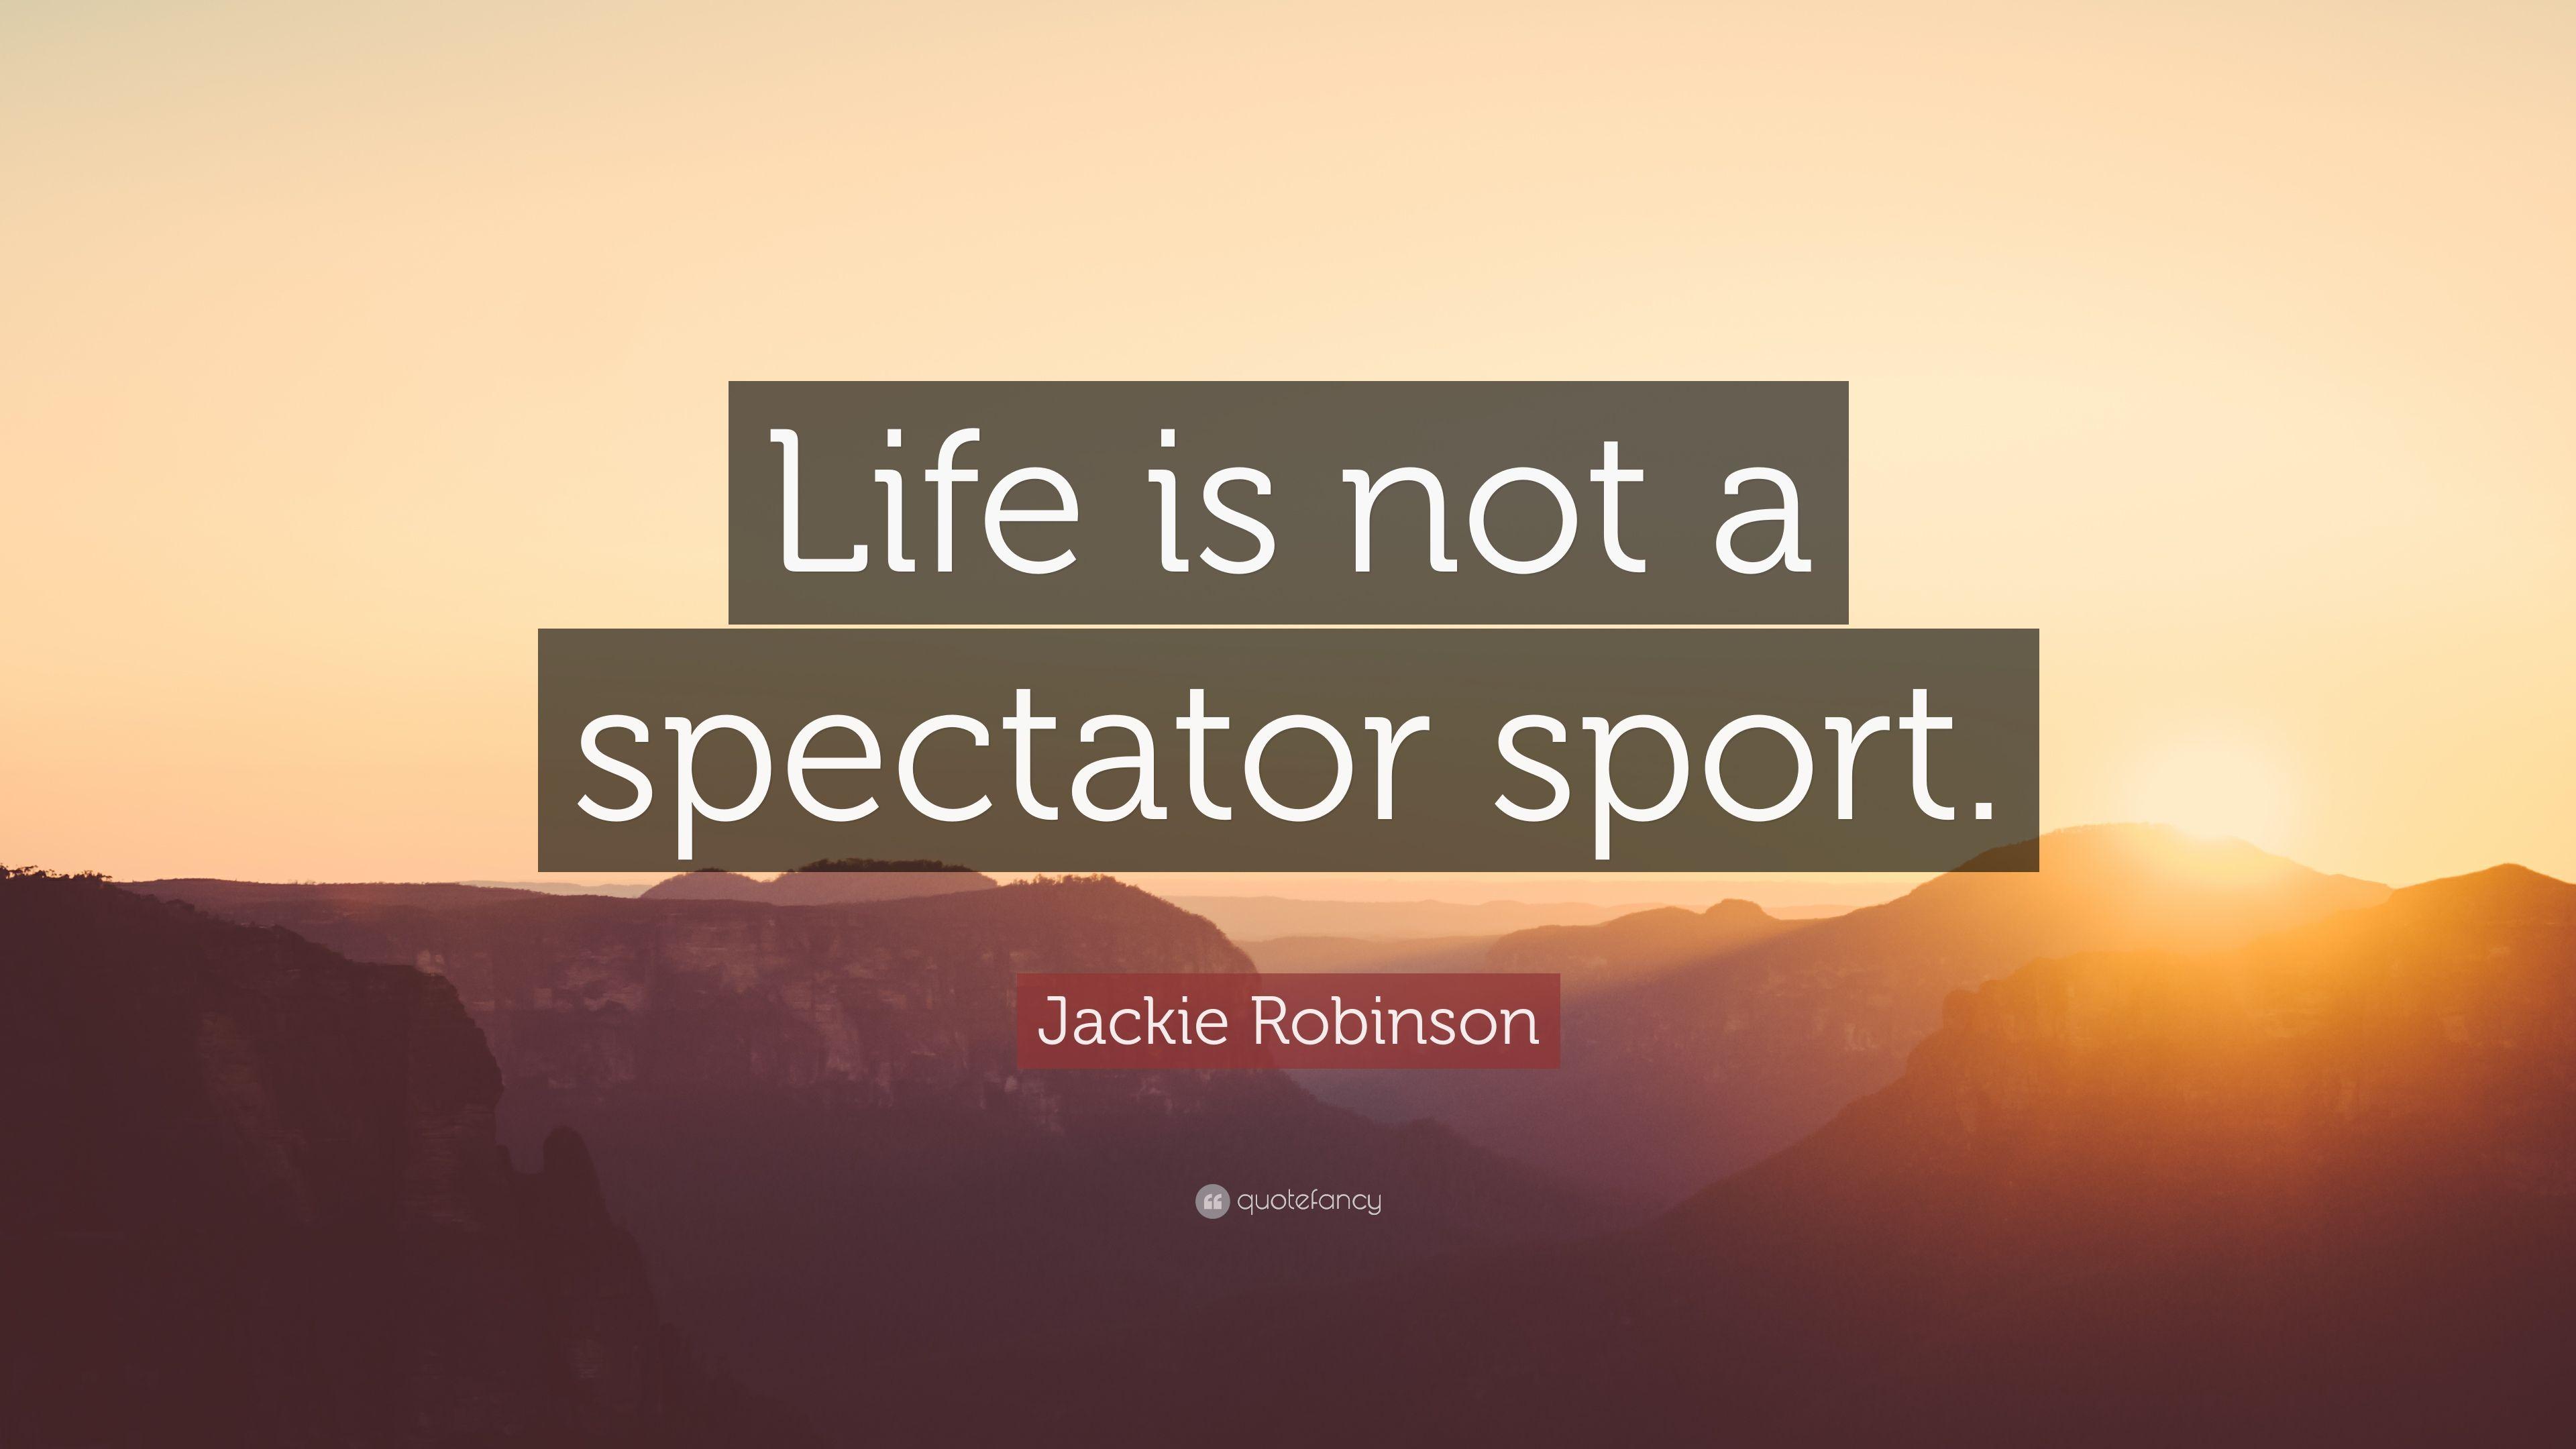 Jackie Robinson Quote: “Life is not a spectator sport.” 7